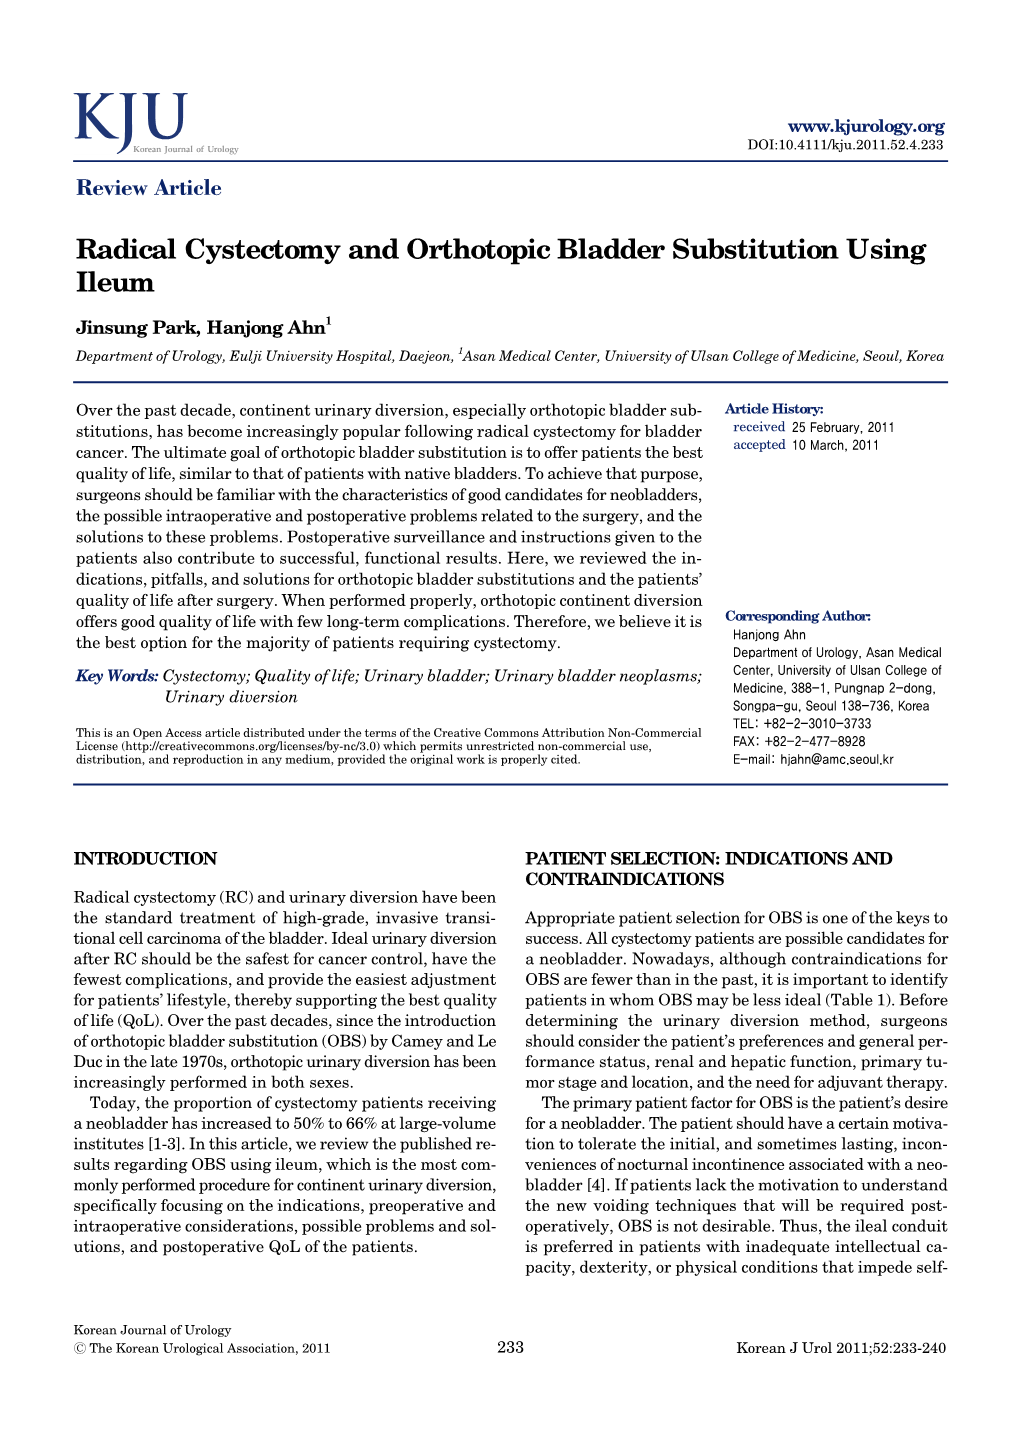 Radical Cystectomy and Orthotopic Bladder Substitution Using Ileum